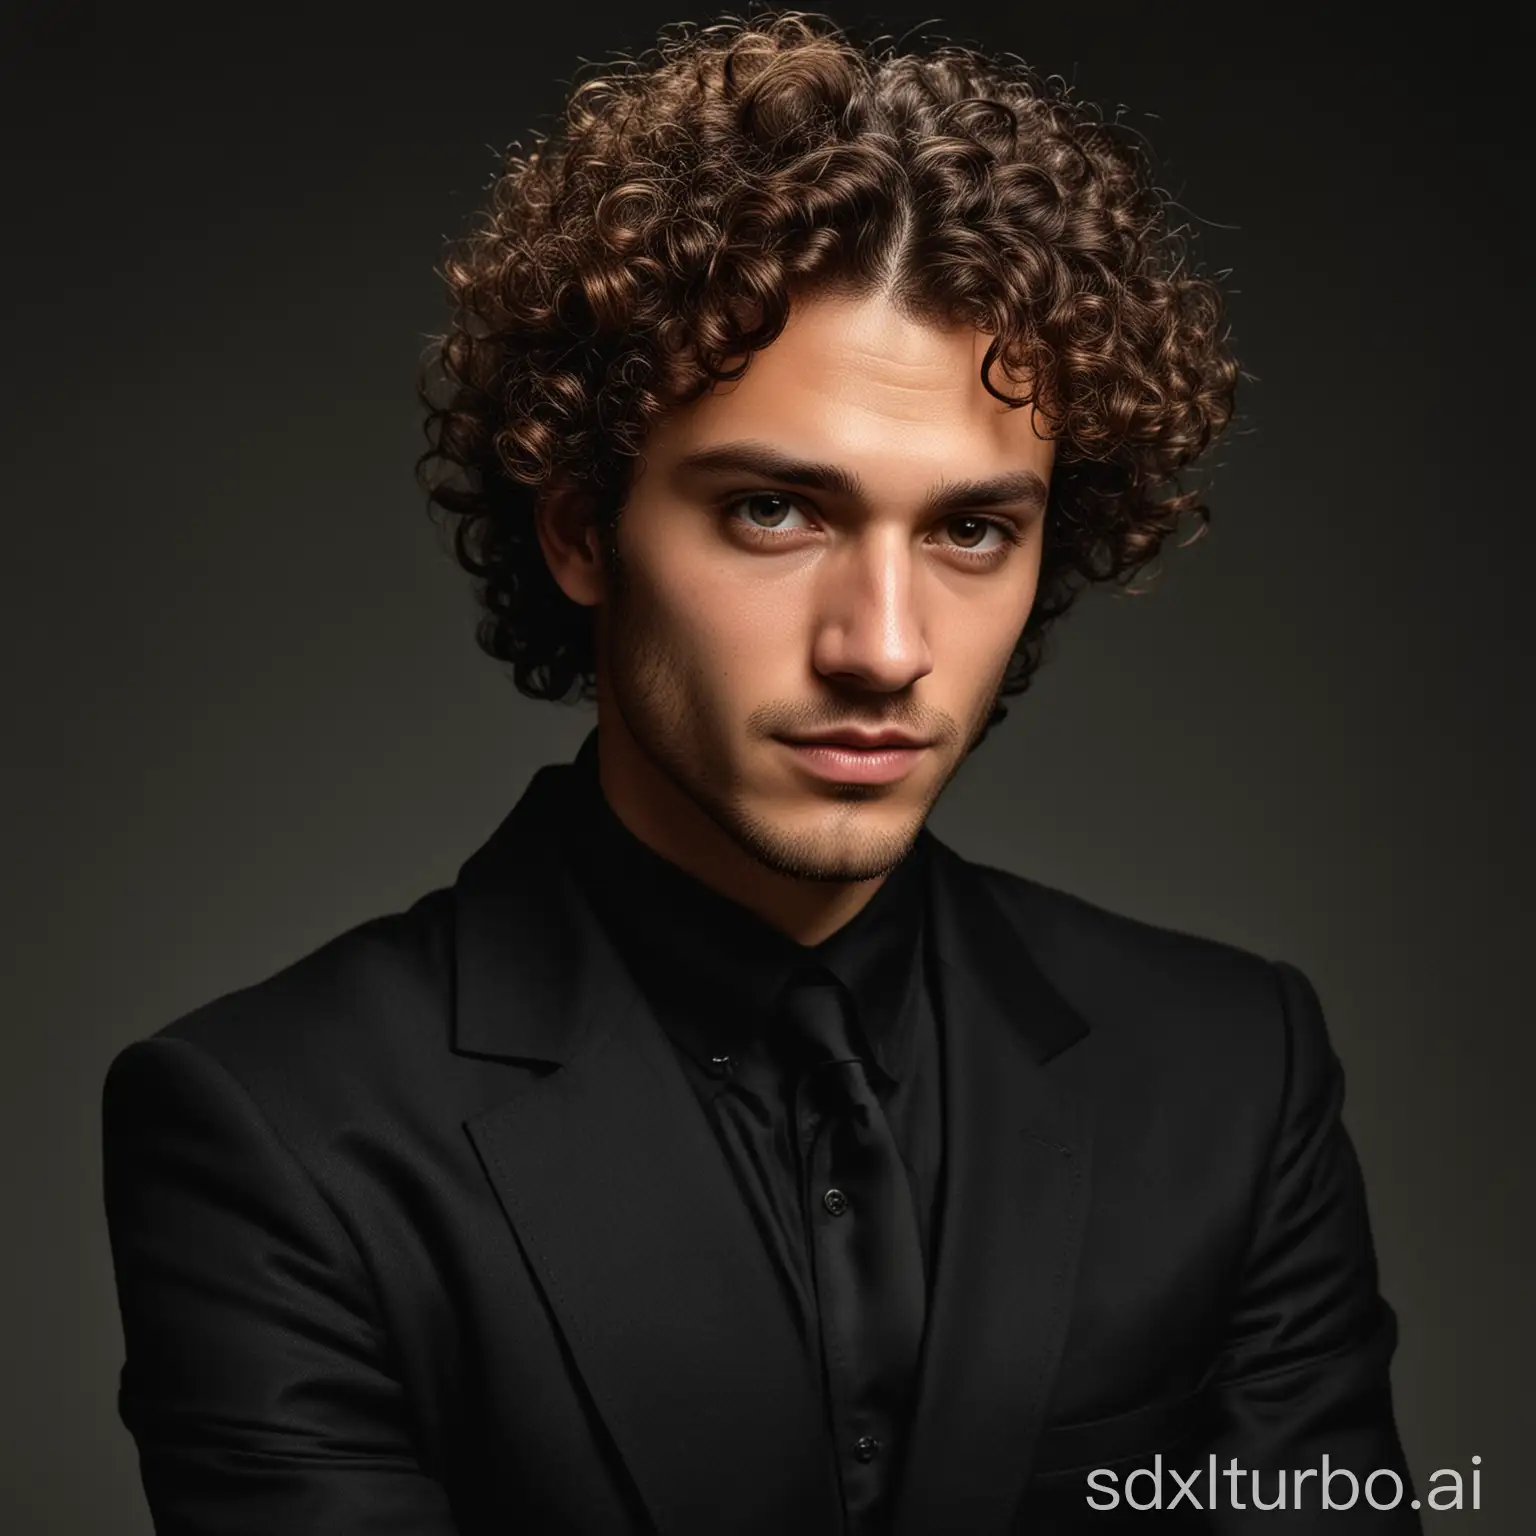 A gorgeous man with curly hair and brown eyes is posing in front of a black background. She is wearing a black suit jacket. He is looking at the camera with a serious expression., in the style of Annie Leibovitz